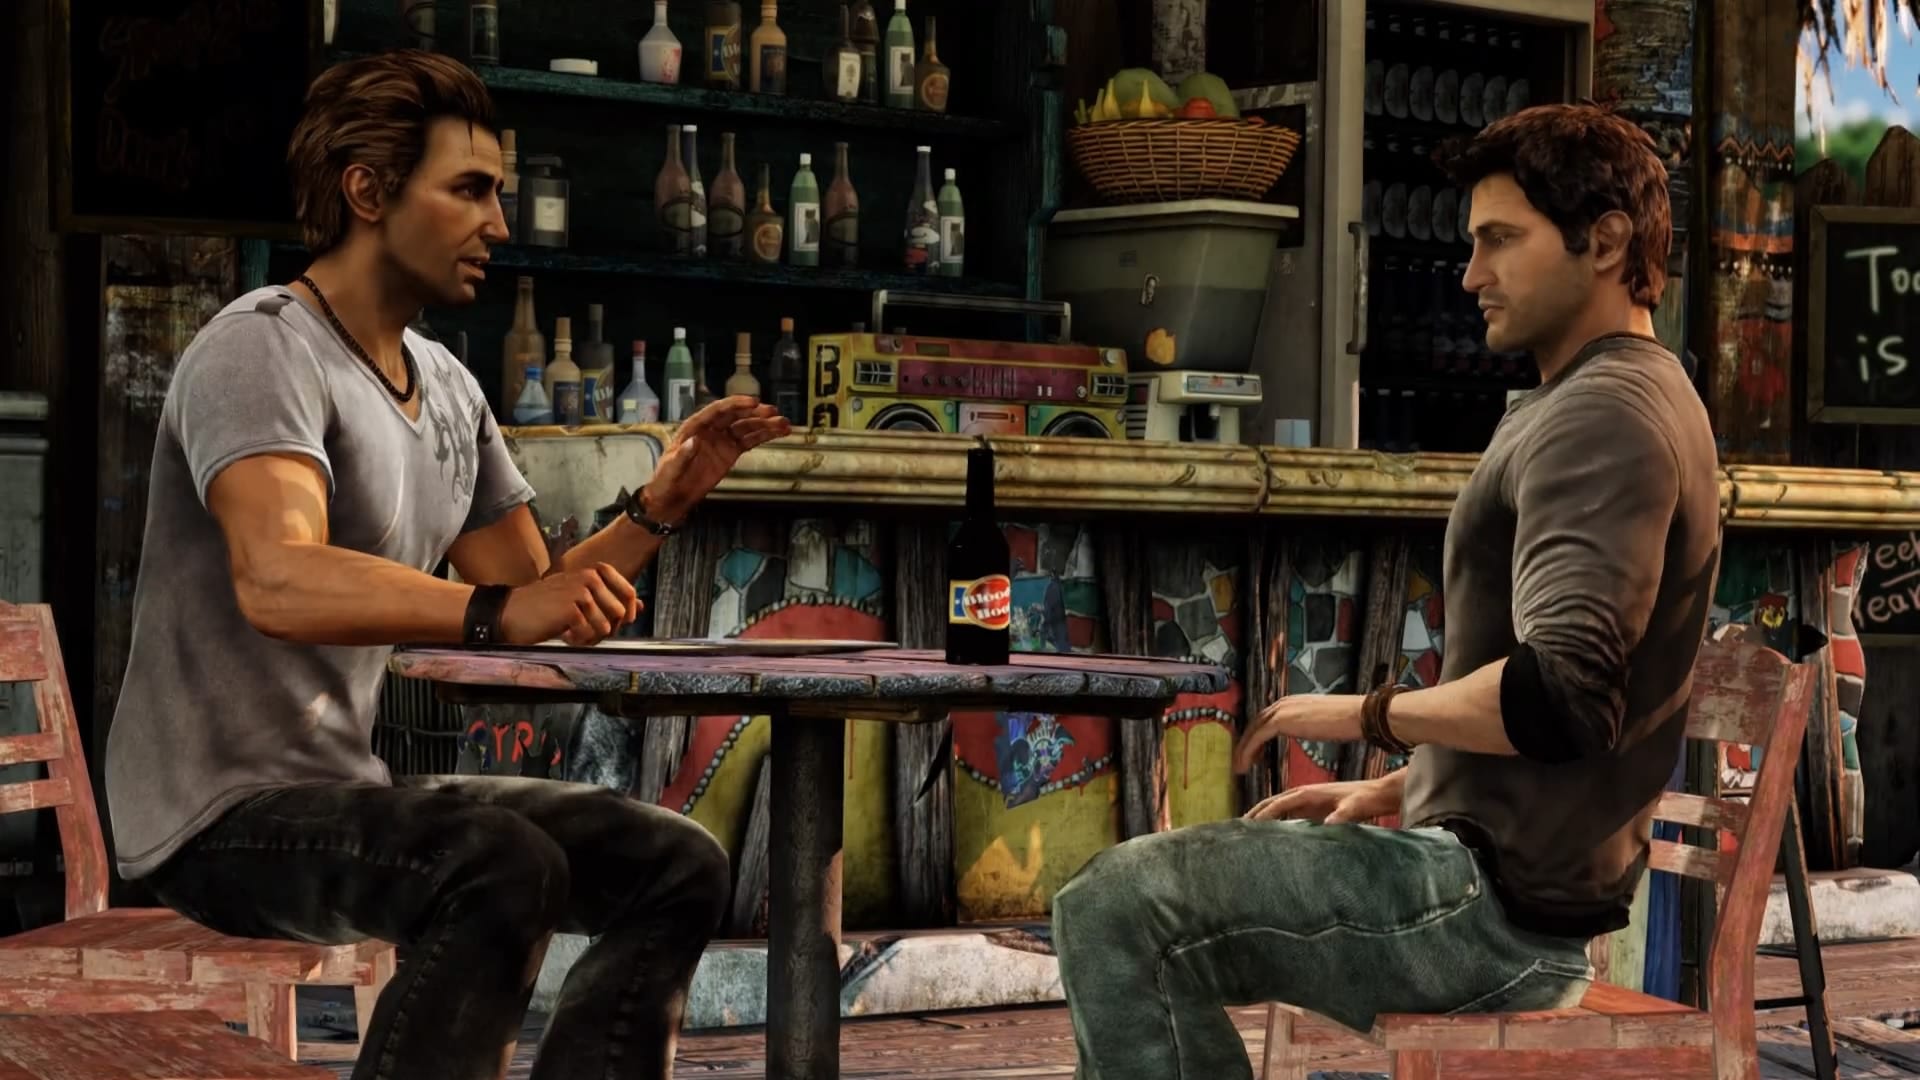 Discussing plans for Uncharted 4.